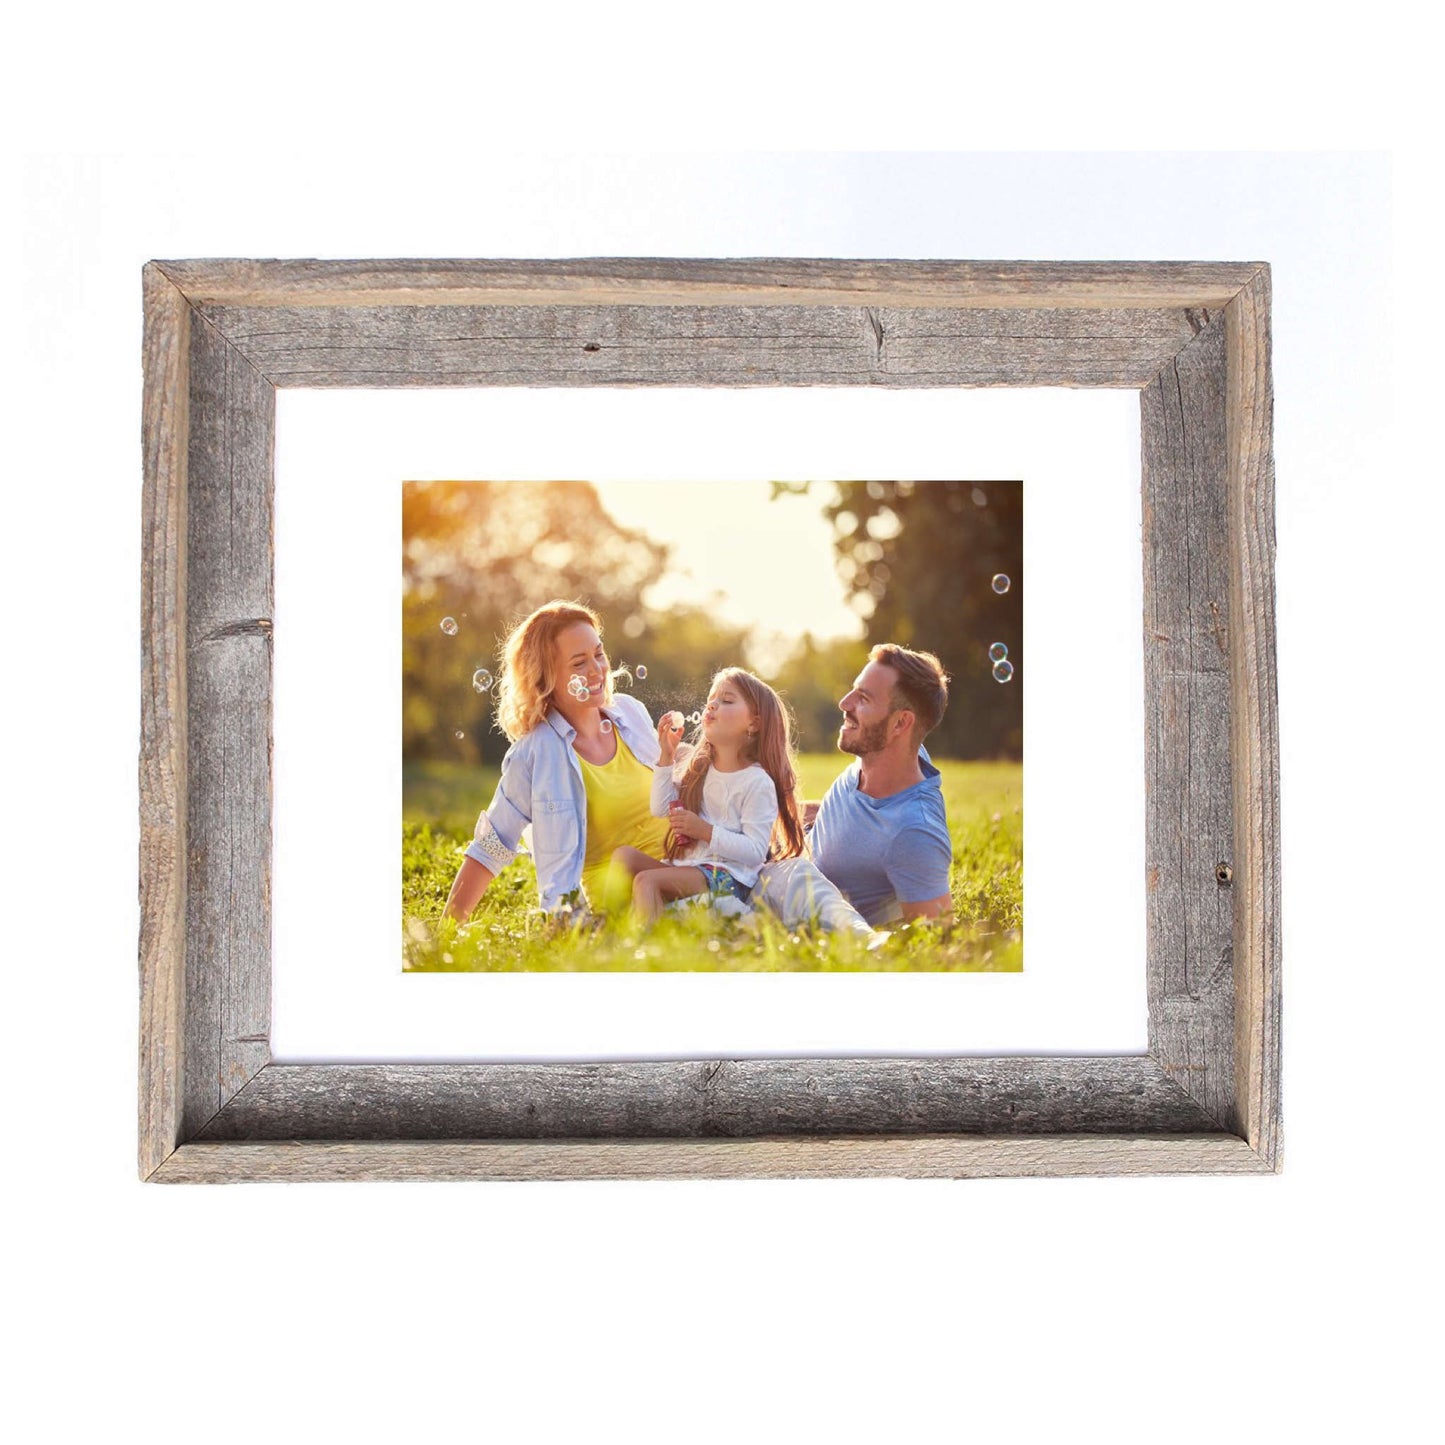 16" X 20" Rustic Reclaimed Wood Picture Frame